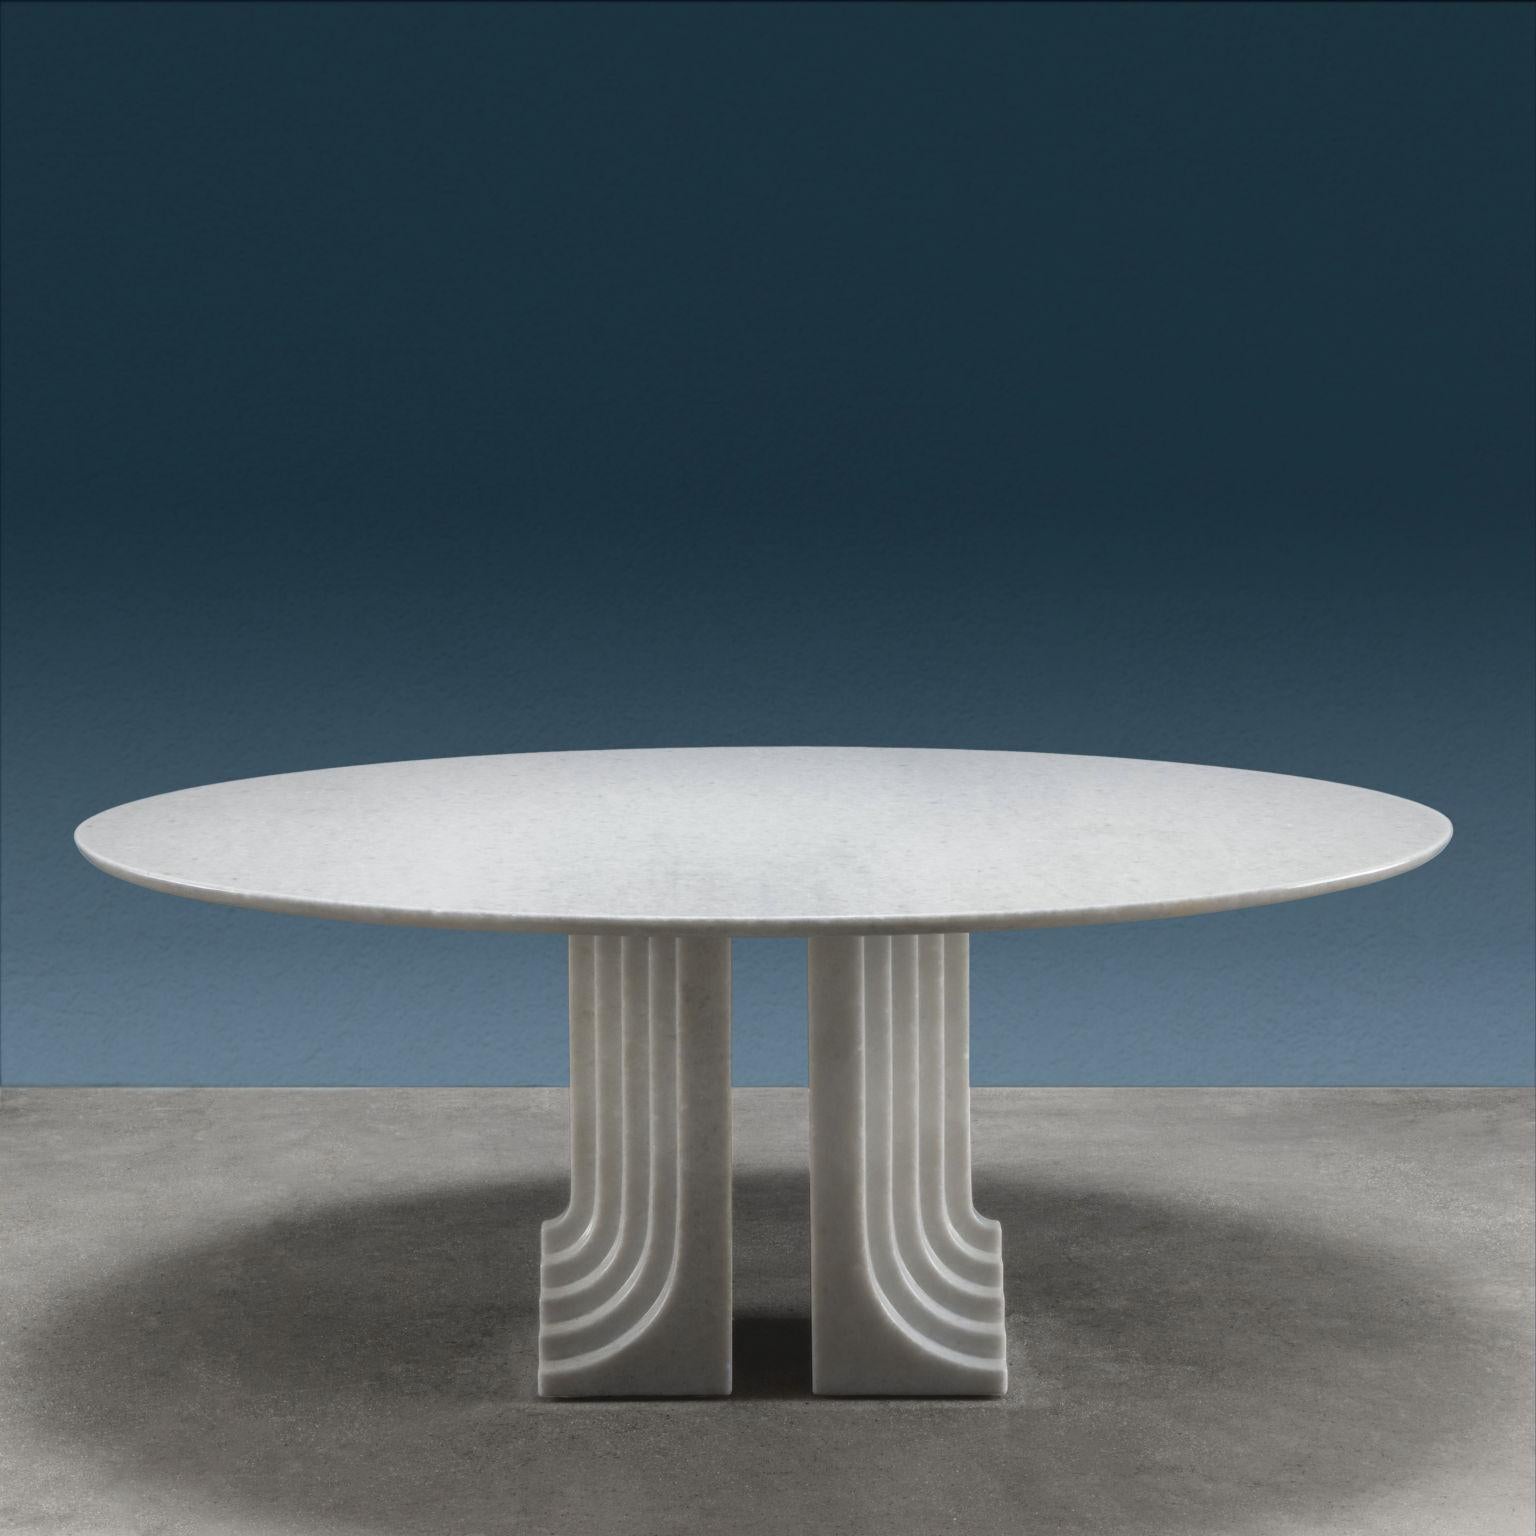 Iconic dining table with oval top model 'Samo' designed by Carlo Scarpa in 1970 and produced by Simon; in white saccaroid marble. 